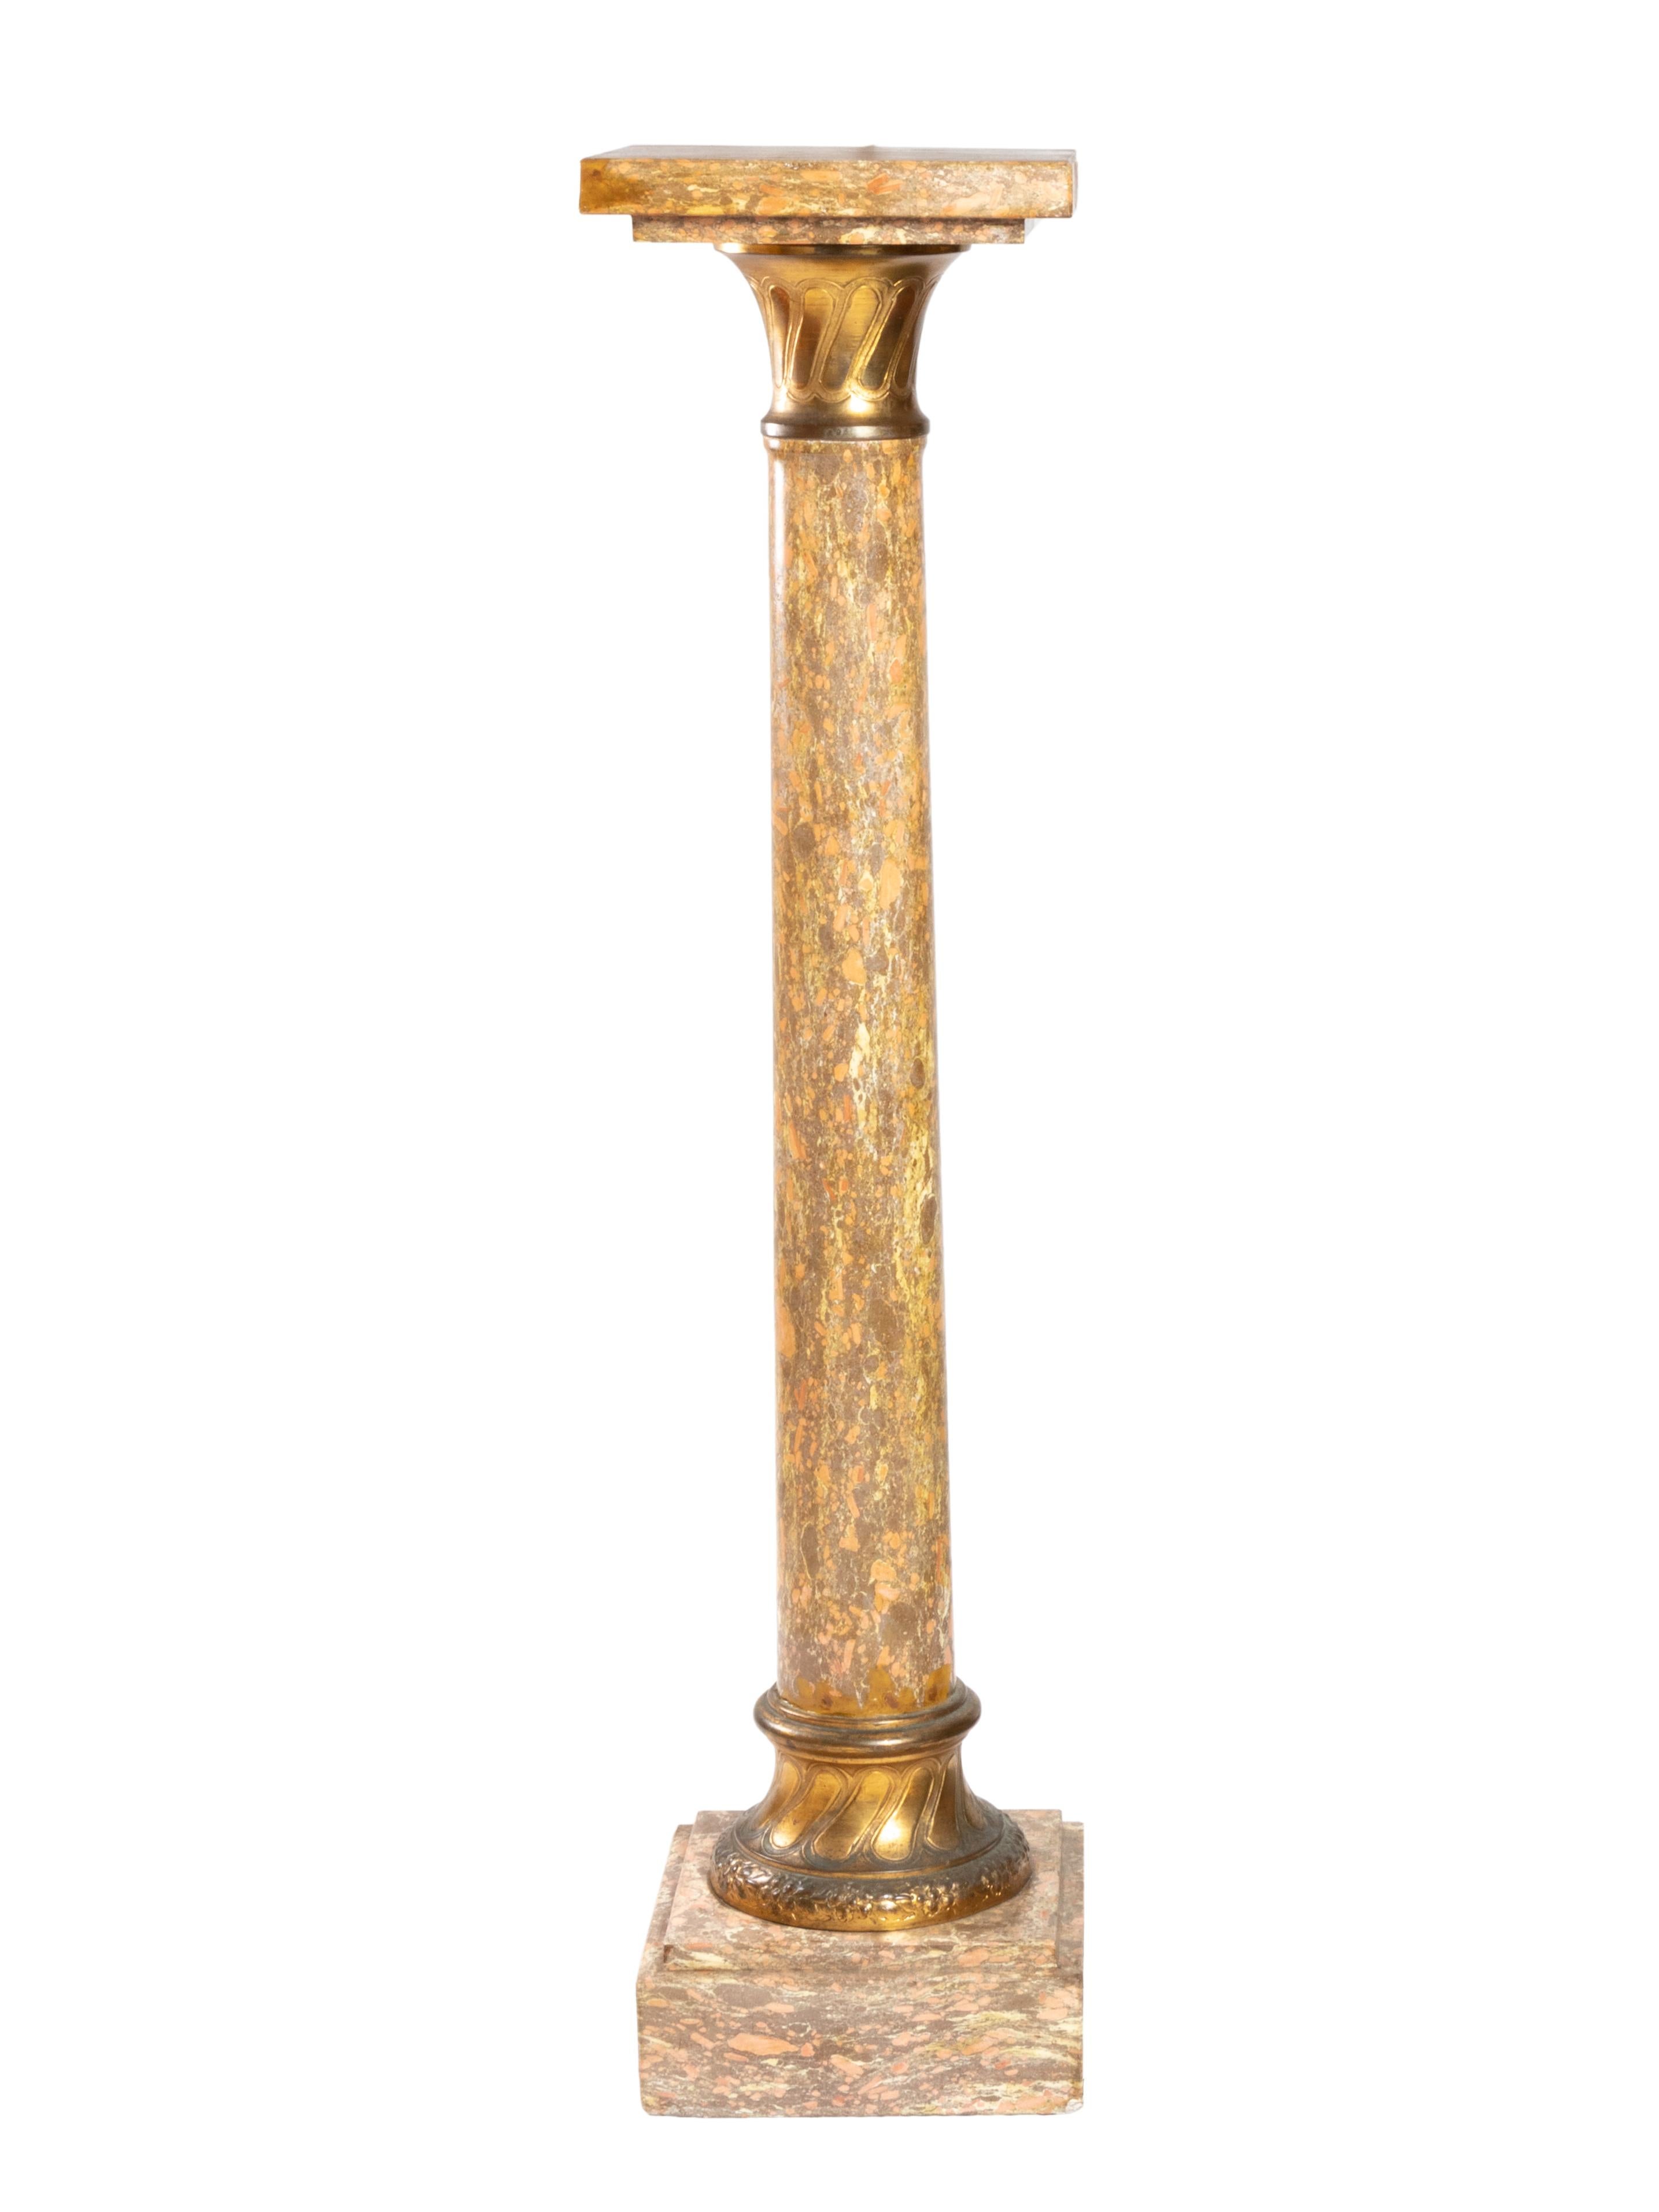 A brocatelle Jaune marble, set on a square and terraced base with gilted bronze details in Napoleon III style and period, circa 1870